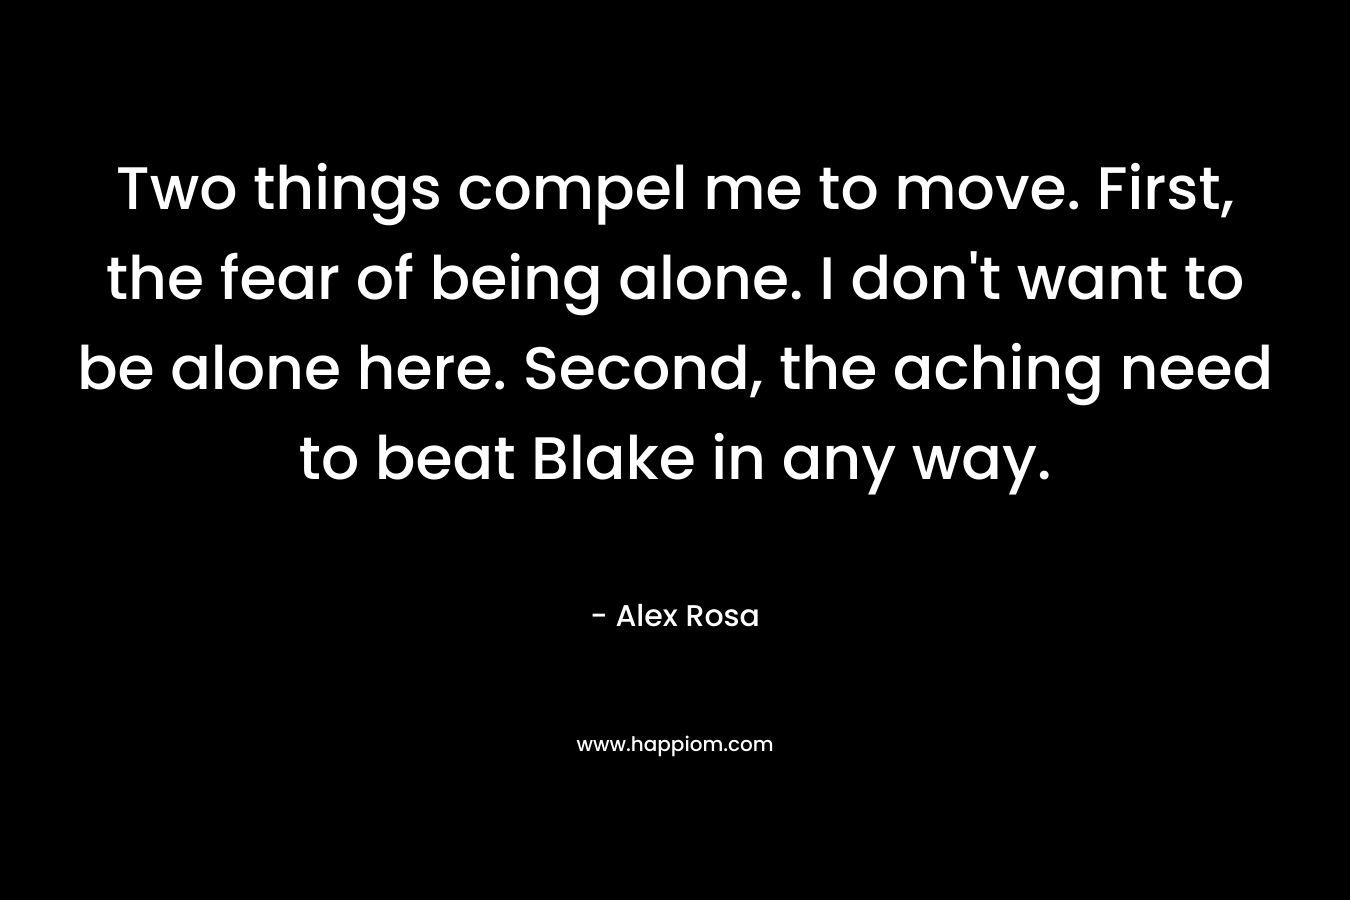 Two things compel me to move. First, the fear of being alone. I don’t want to be alone here. Second, the aching need to beat Blake in any way. – Alex Rosa